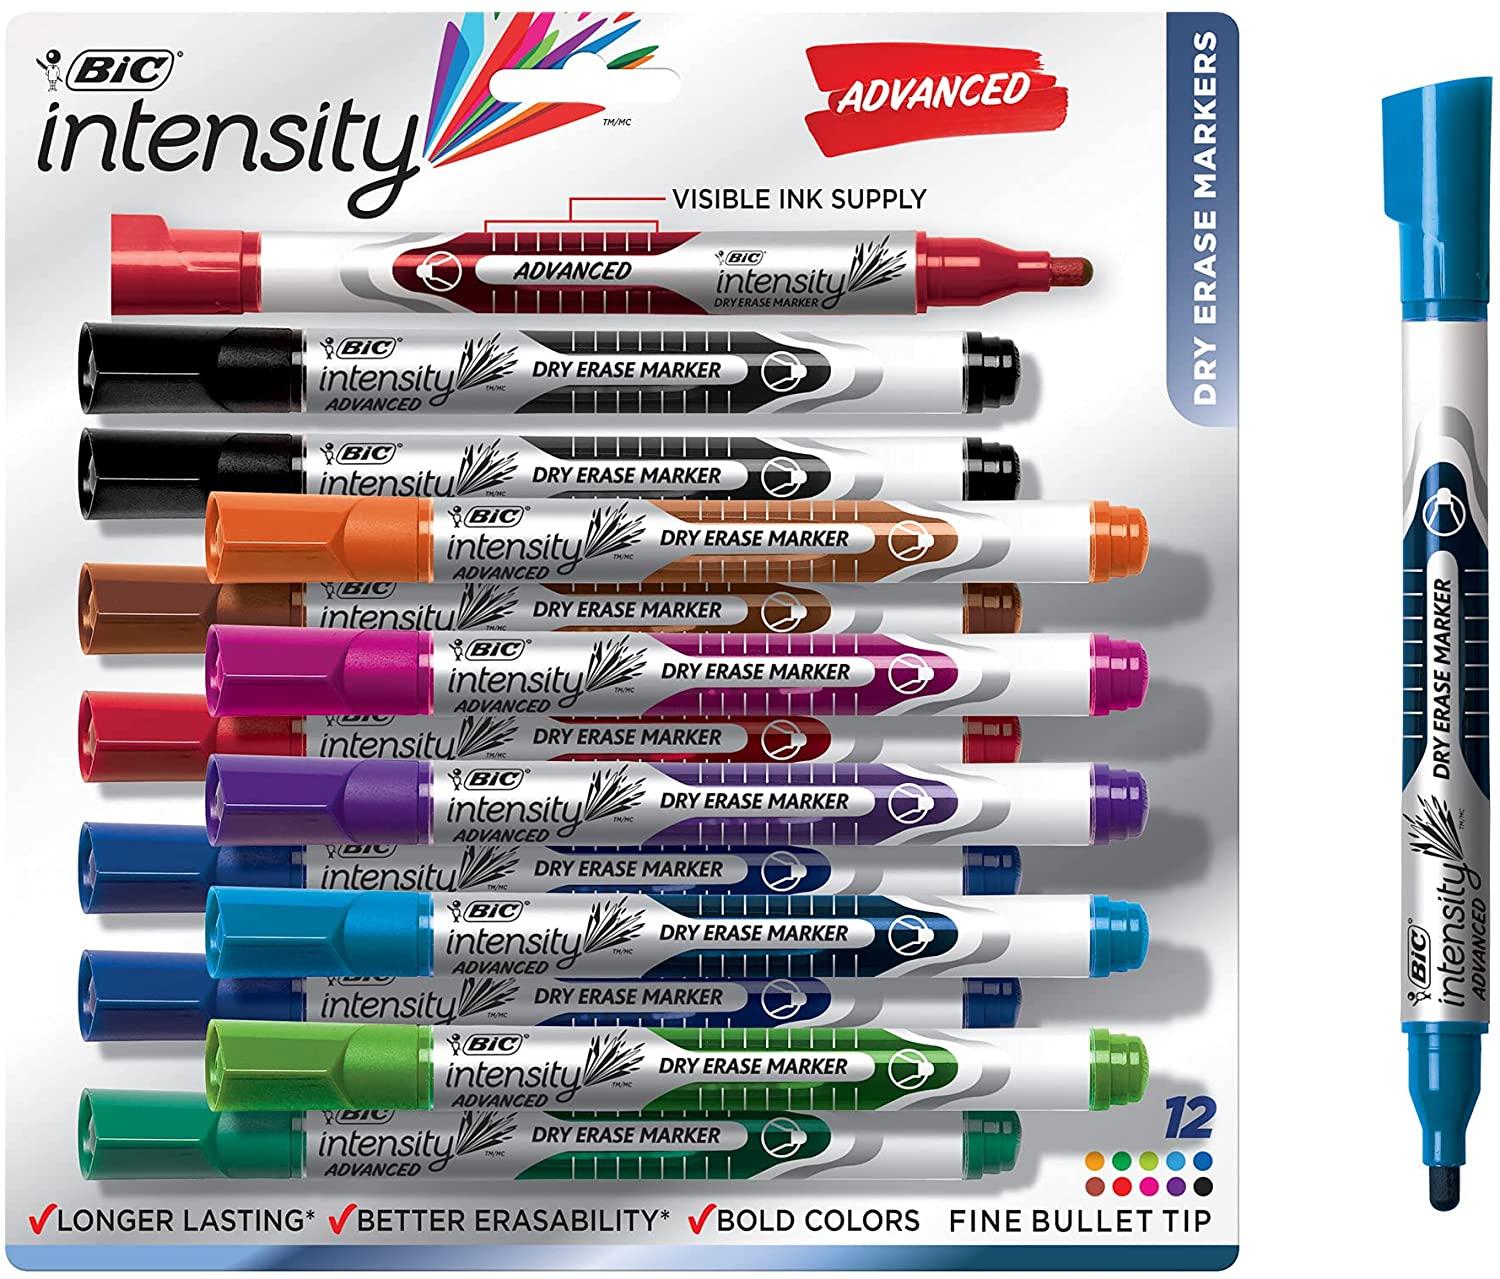 12 BIC Intensity Advanced Dry Erase Markers for $6.42 Shipped